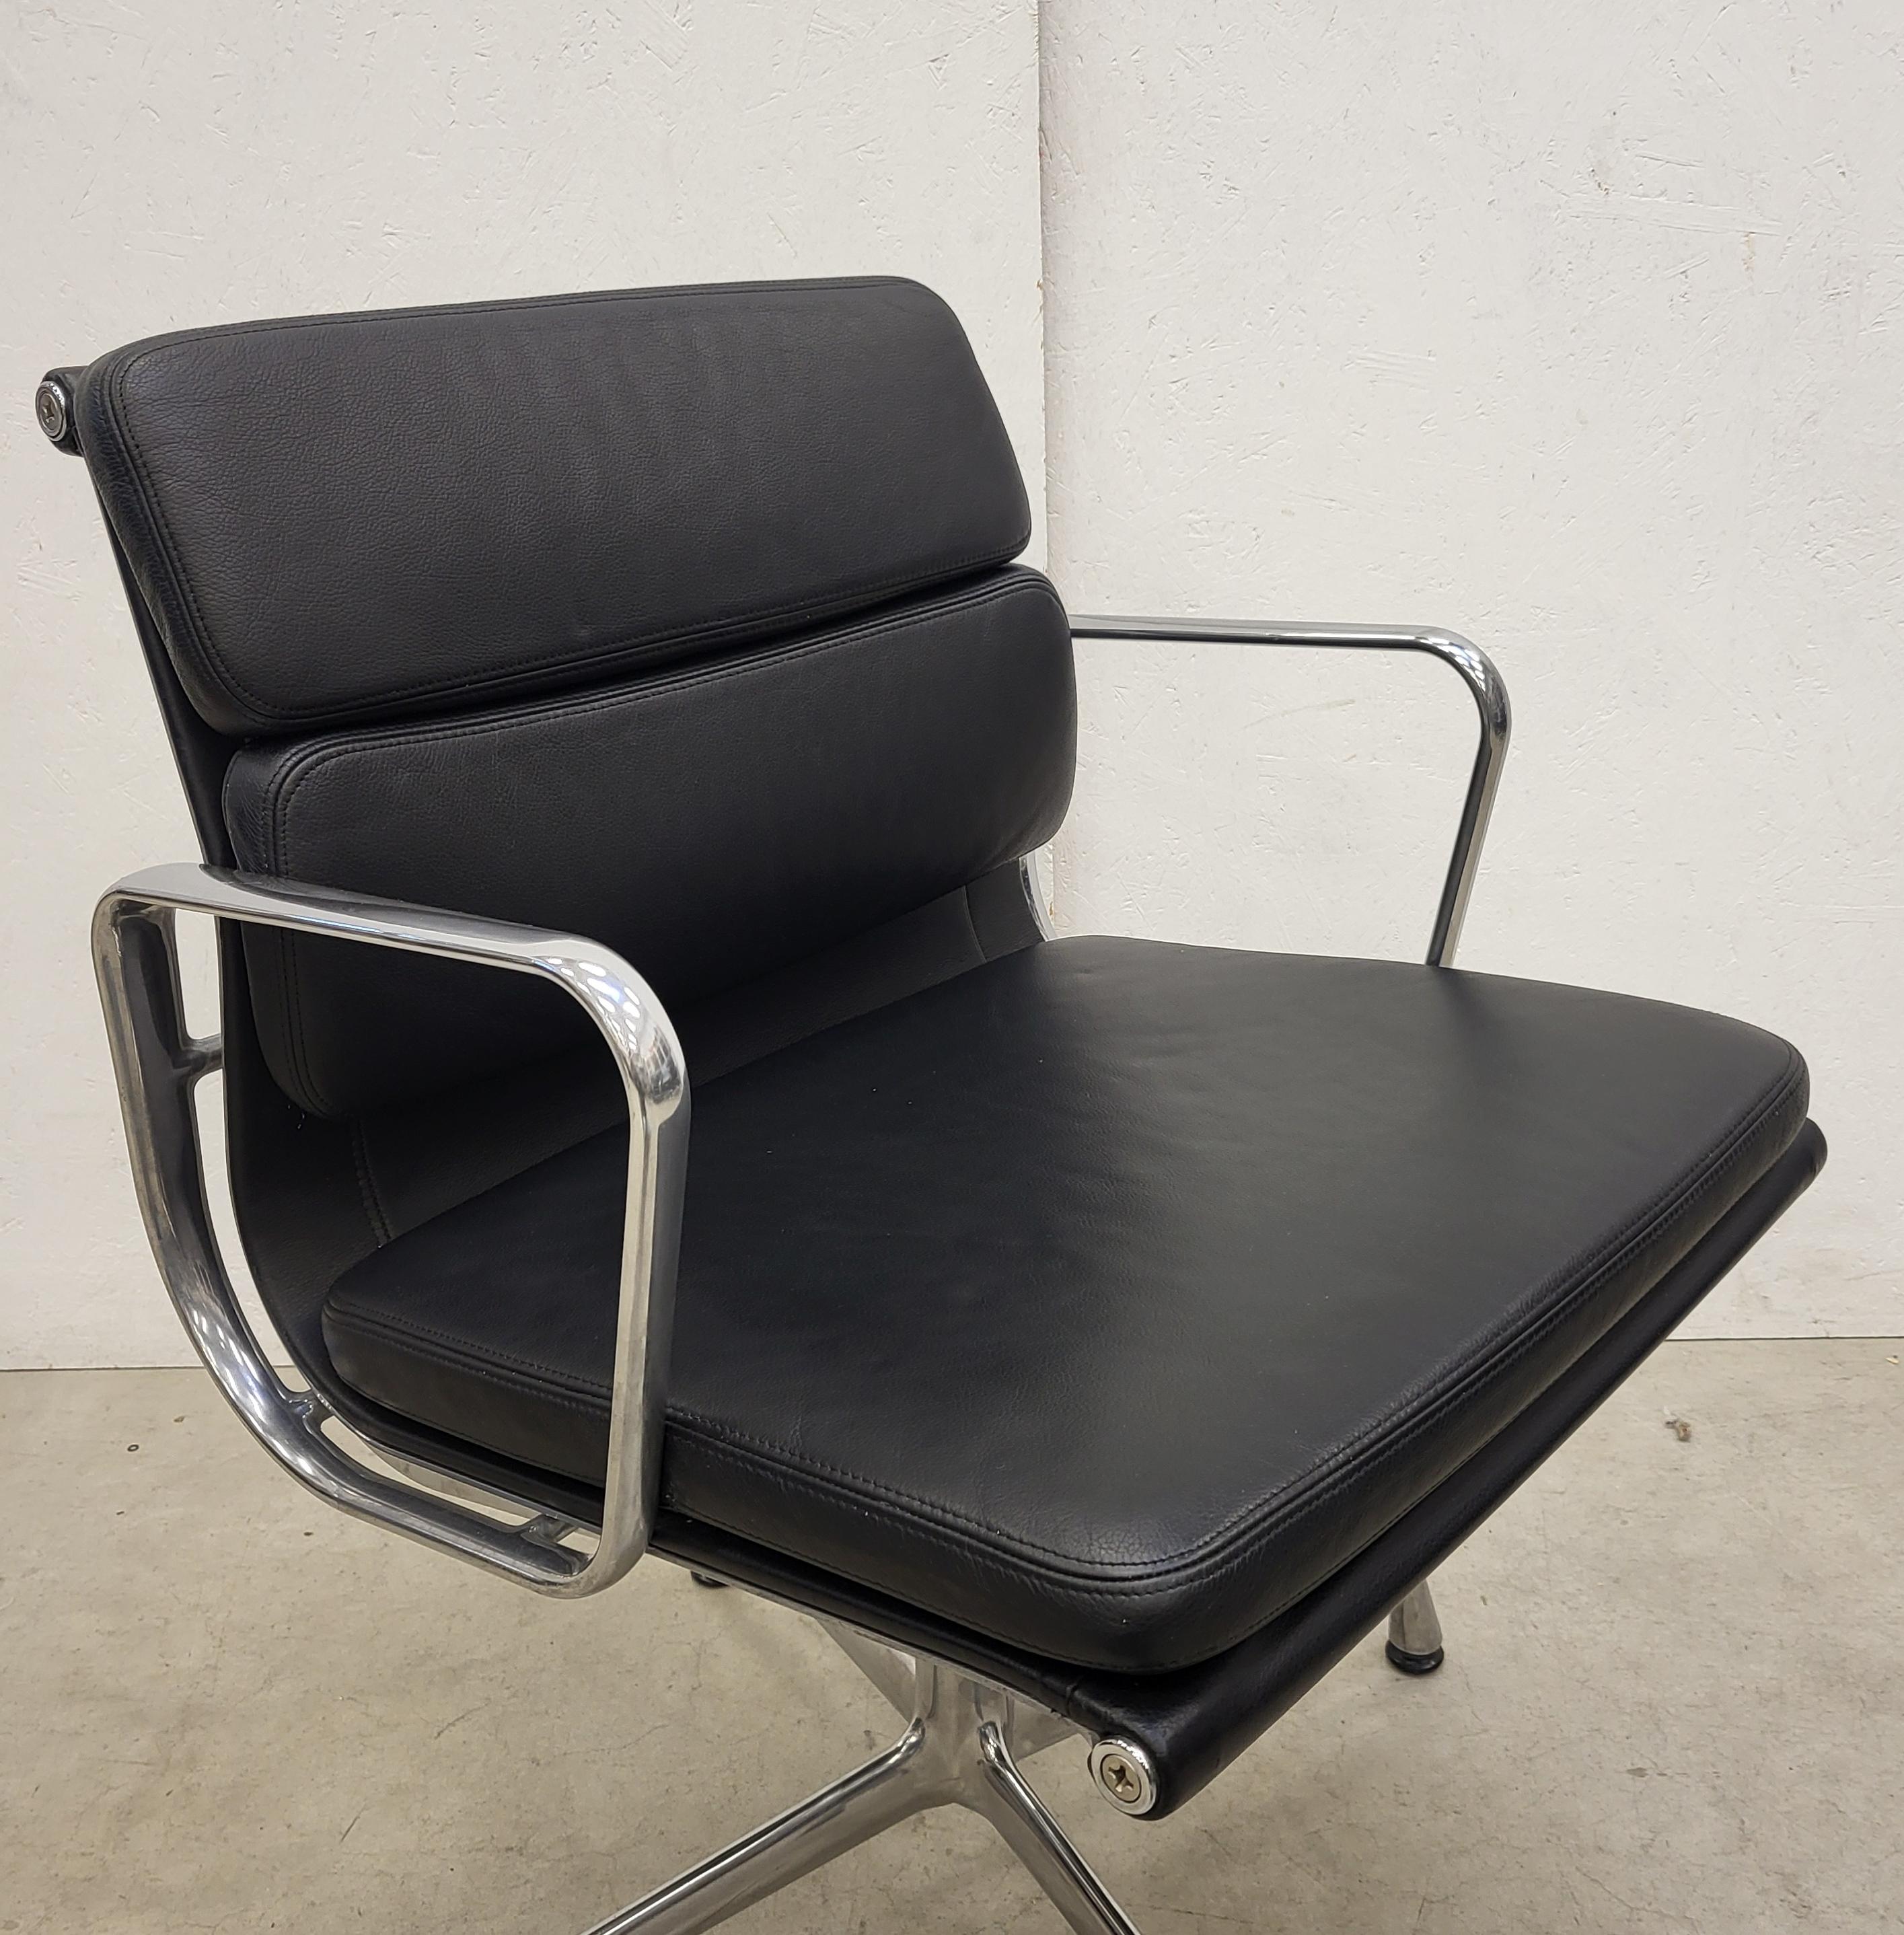 Aluminum 4x Vitra EA208 Soft Pad Office Chair by Charles Eames, 2006 Model